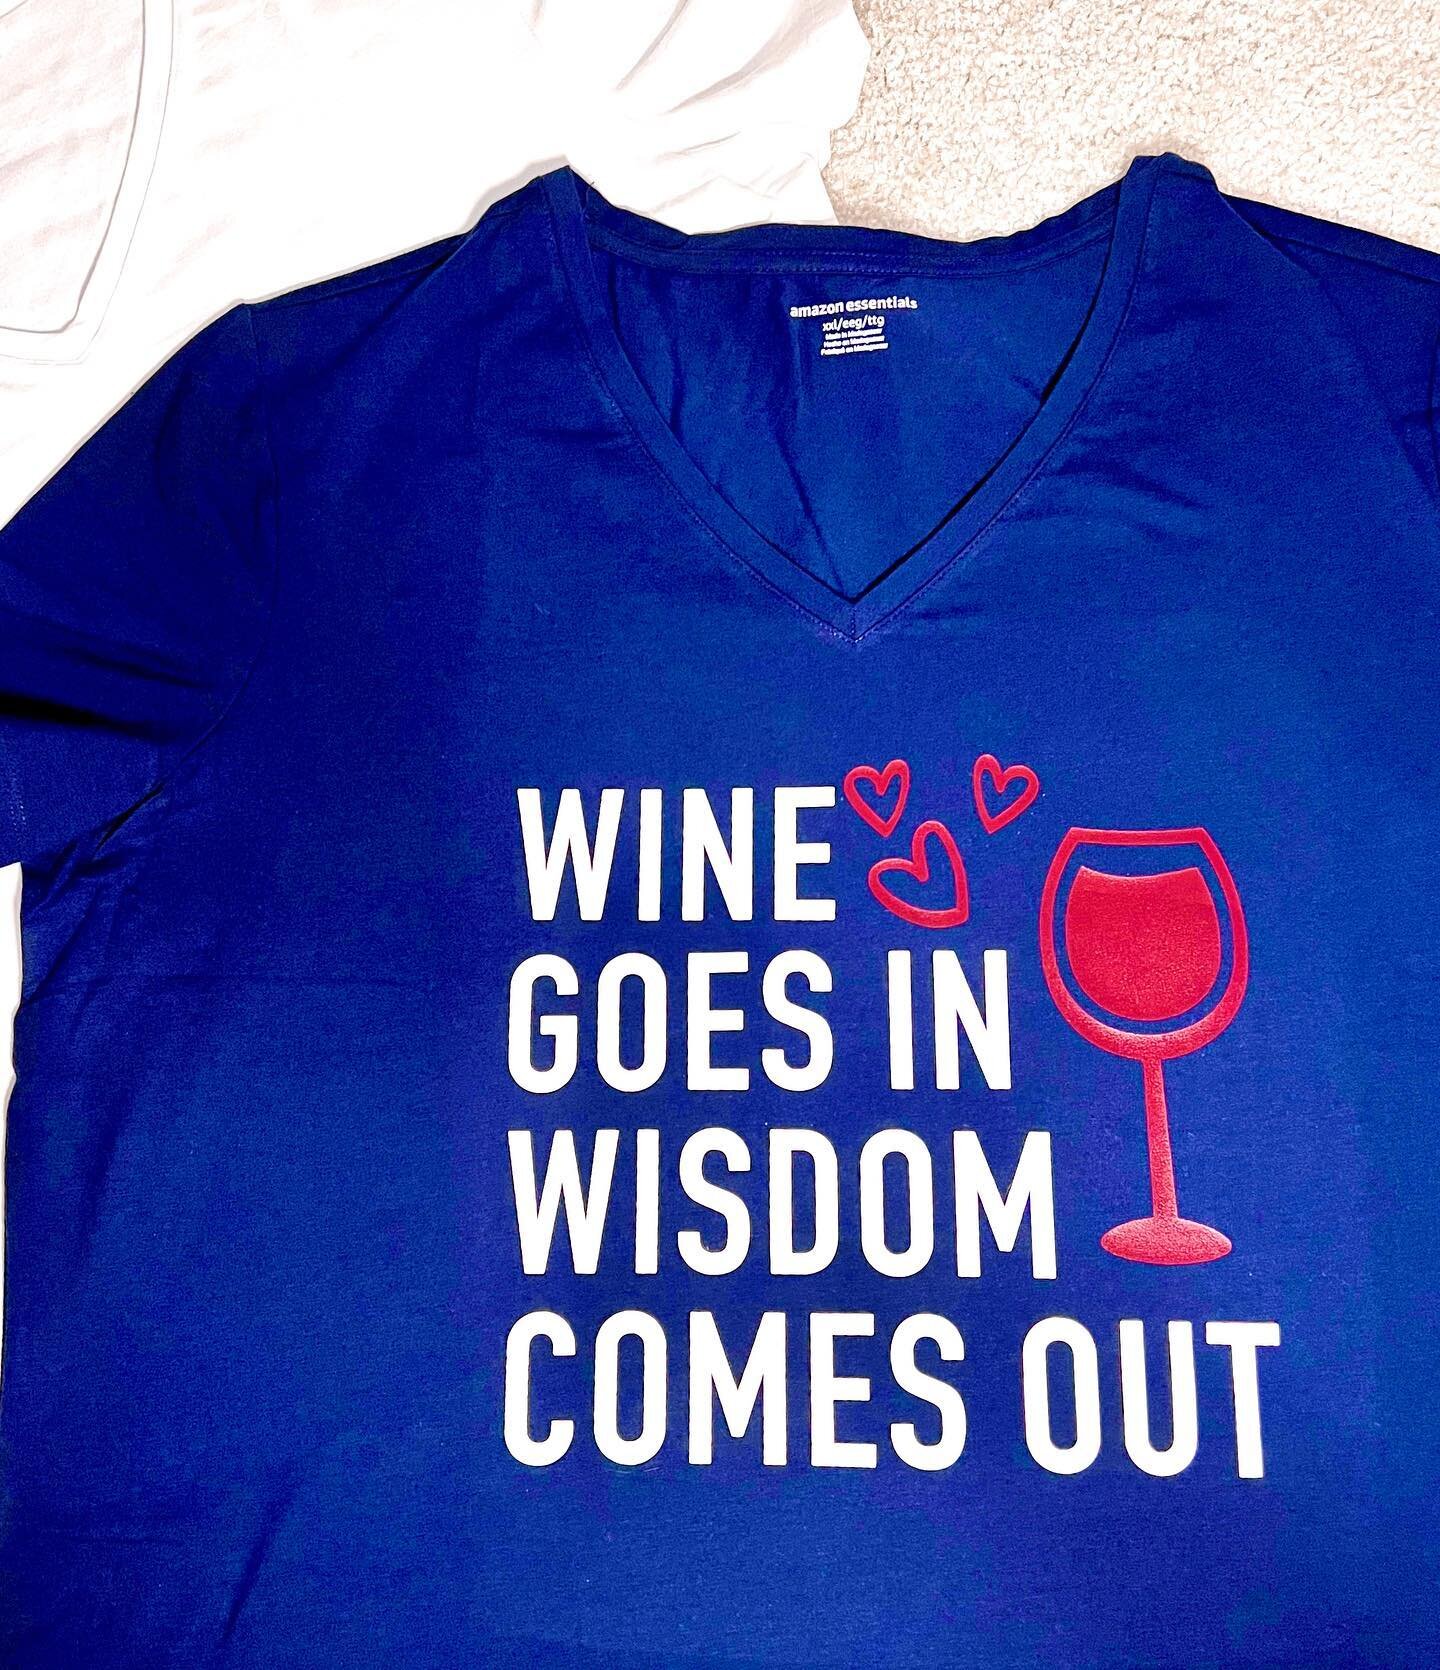 Happy Mother&rsquo;s Day 💐 
Even graphic tees can be customized to whatever saying resonates with you! These two were a part of a Mother&rsquo;s Day order or a very wise mom 🍷 

#mothersdaygifts #mothersday #graphictees #cricutmade